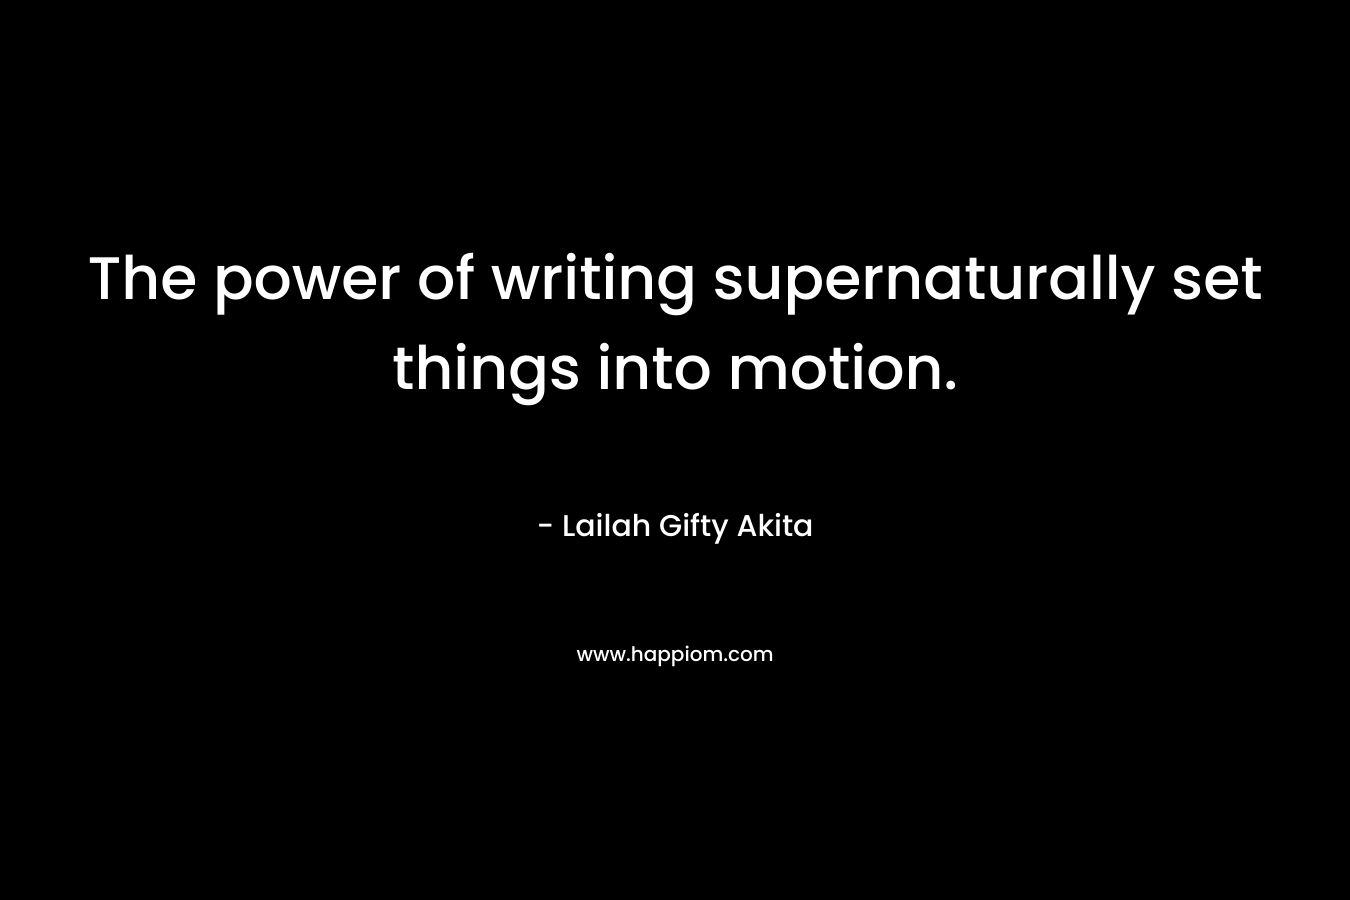 The power of writing supernaturally set things into motion.